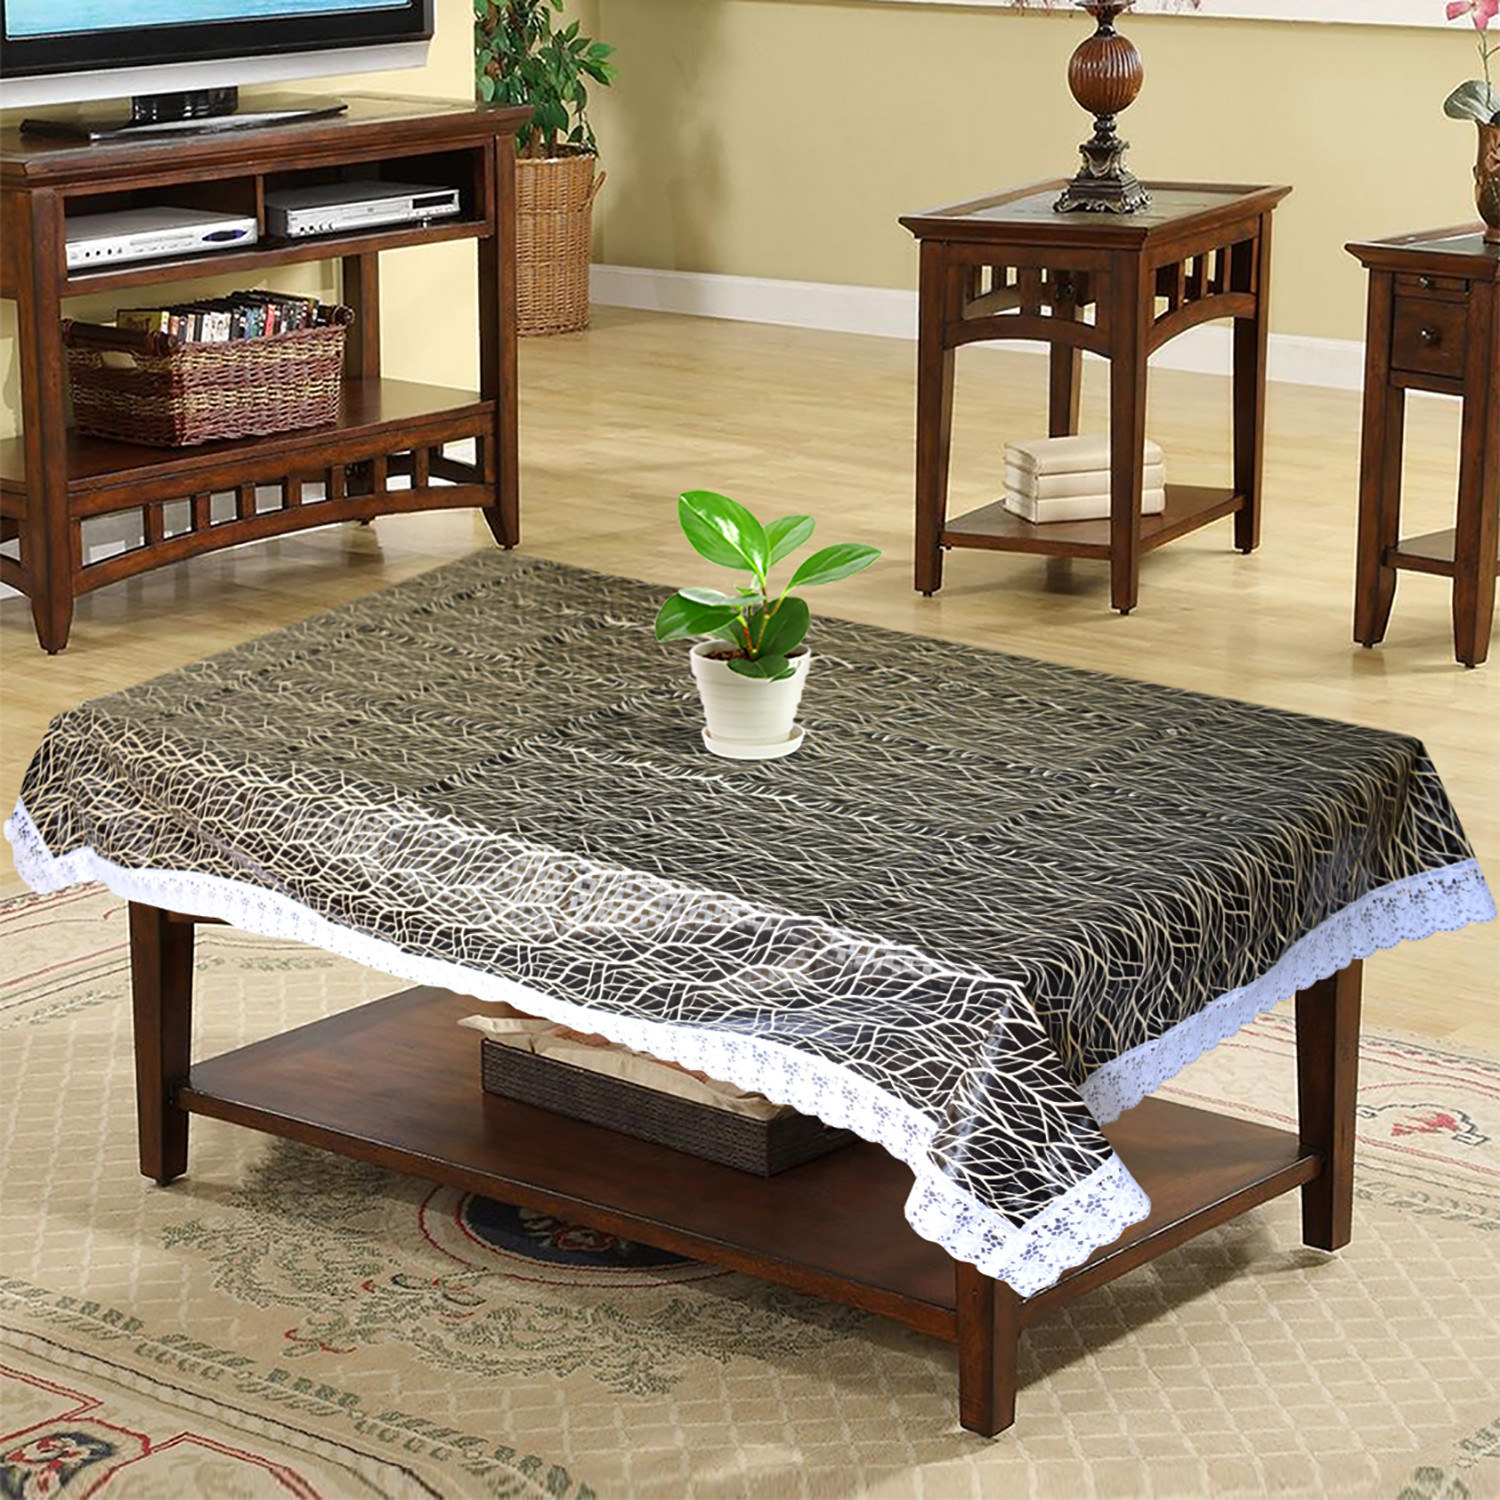 Kuber Industries Tree Printed PVC 4 Seater Center Table Cover, Protector With White Lace Border, 40